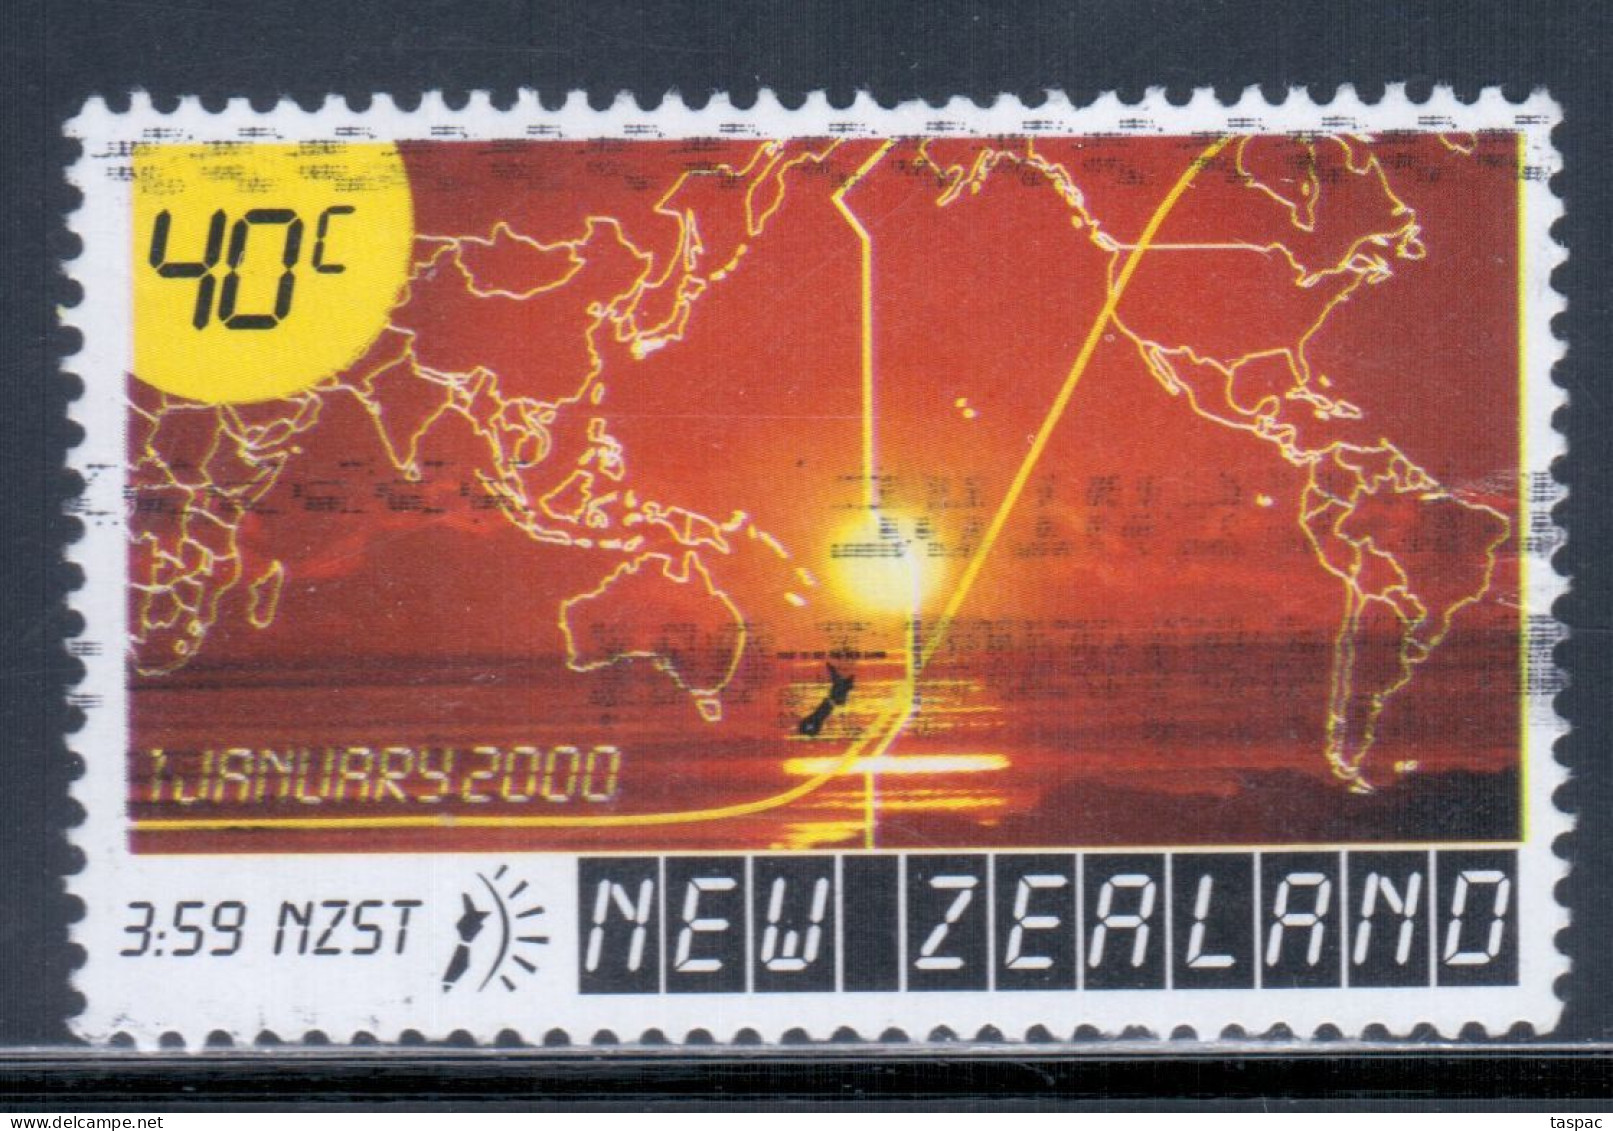 New Zealand 2000 Mi# 1813 Used - First Sunrise Of The New Millennium / Space - Oceania